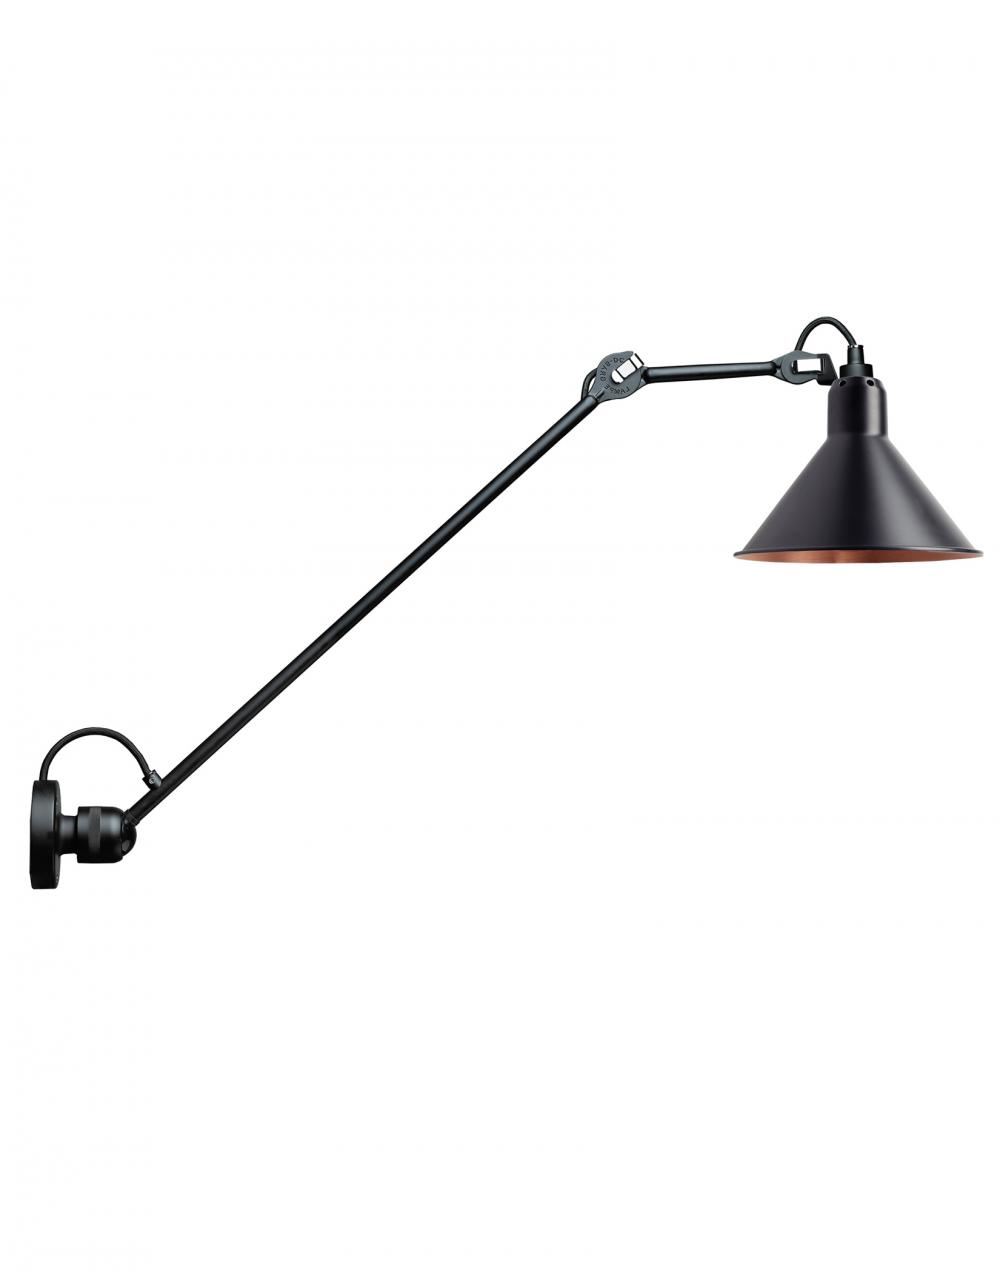 Lampe Gras 304 Large Wall Light Black Shade With Copper Interior Conic Shade